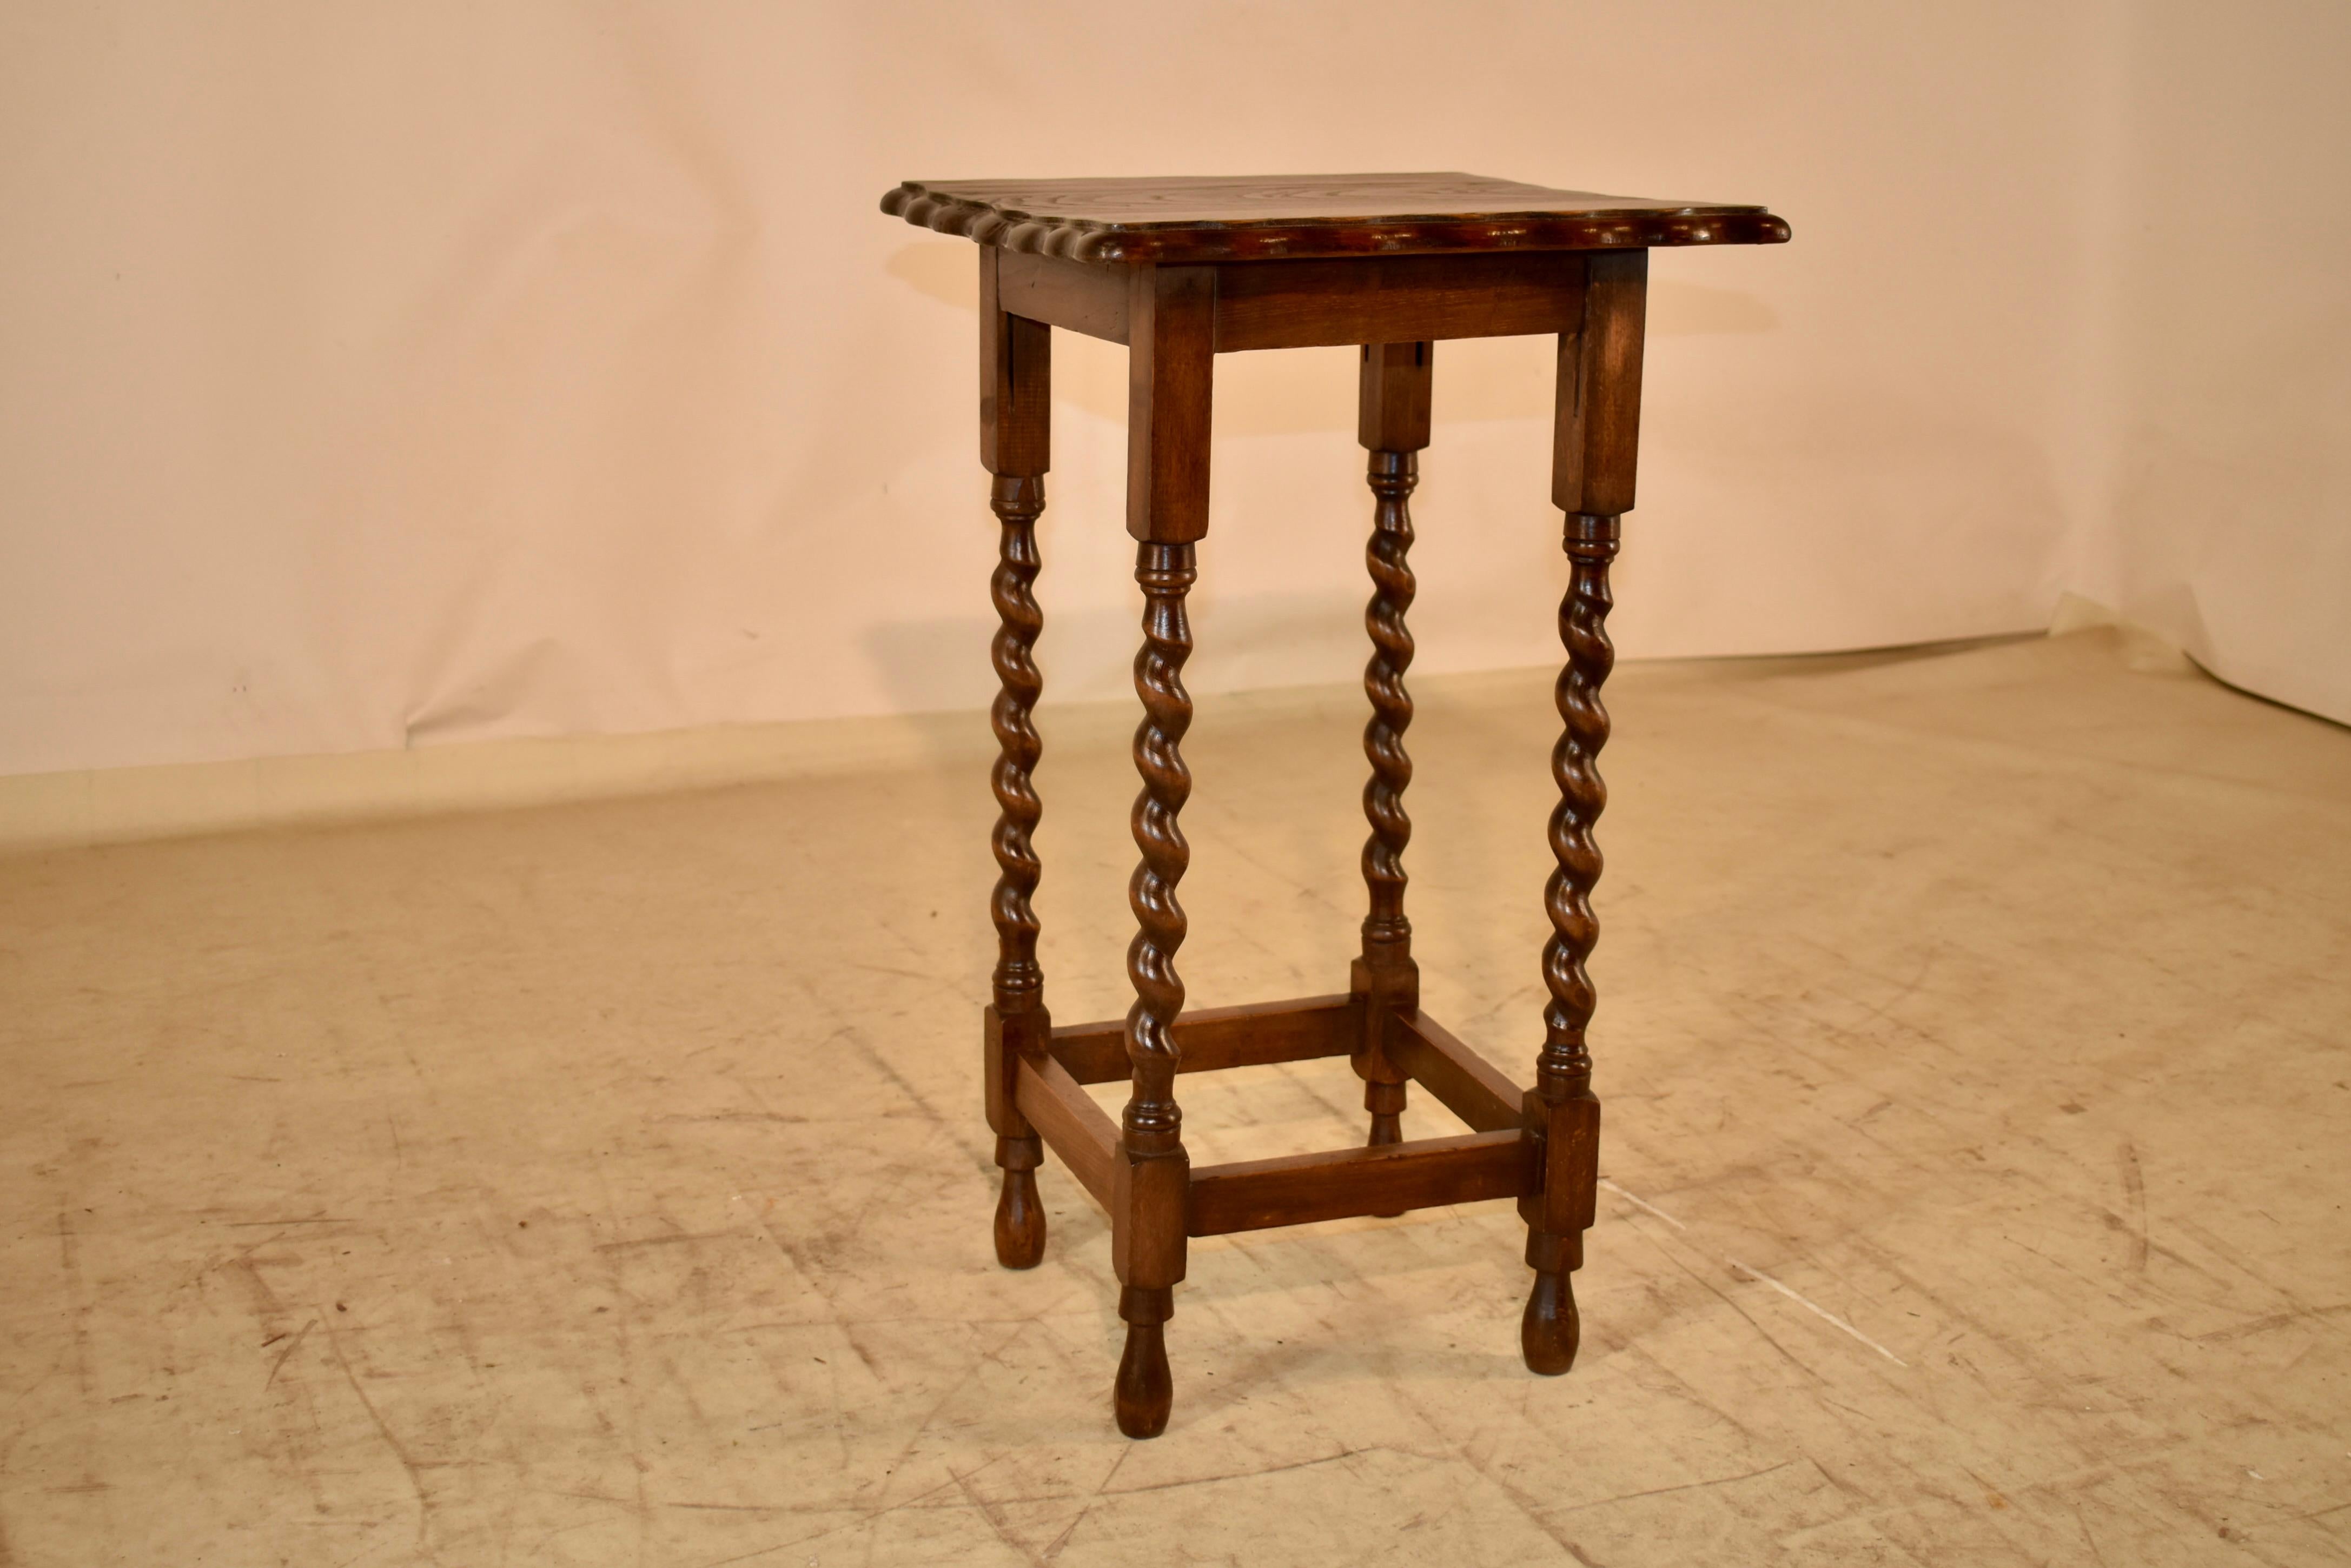 Circa 1900 period Edwardian oak side table from England.  The top has lovely graining, and is surrounded by a beveled and scalloped edge.  The top follows down to a simple apron and is supported on hand turned barley twist legs, joined by simple